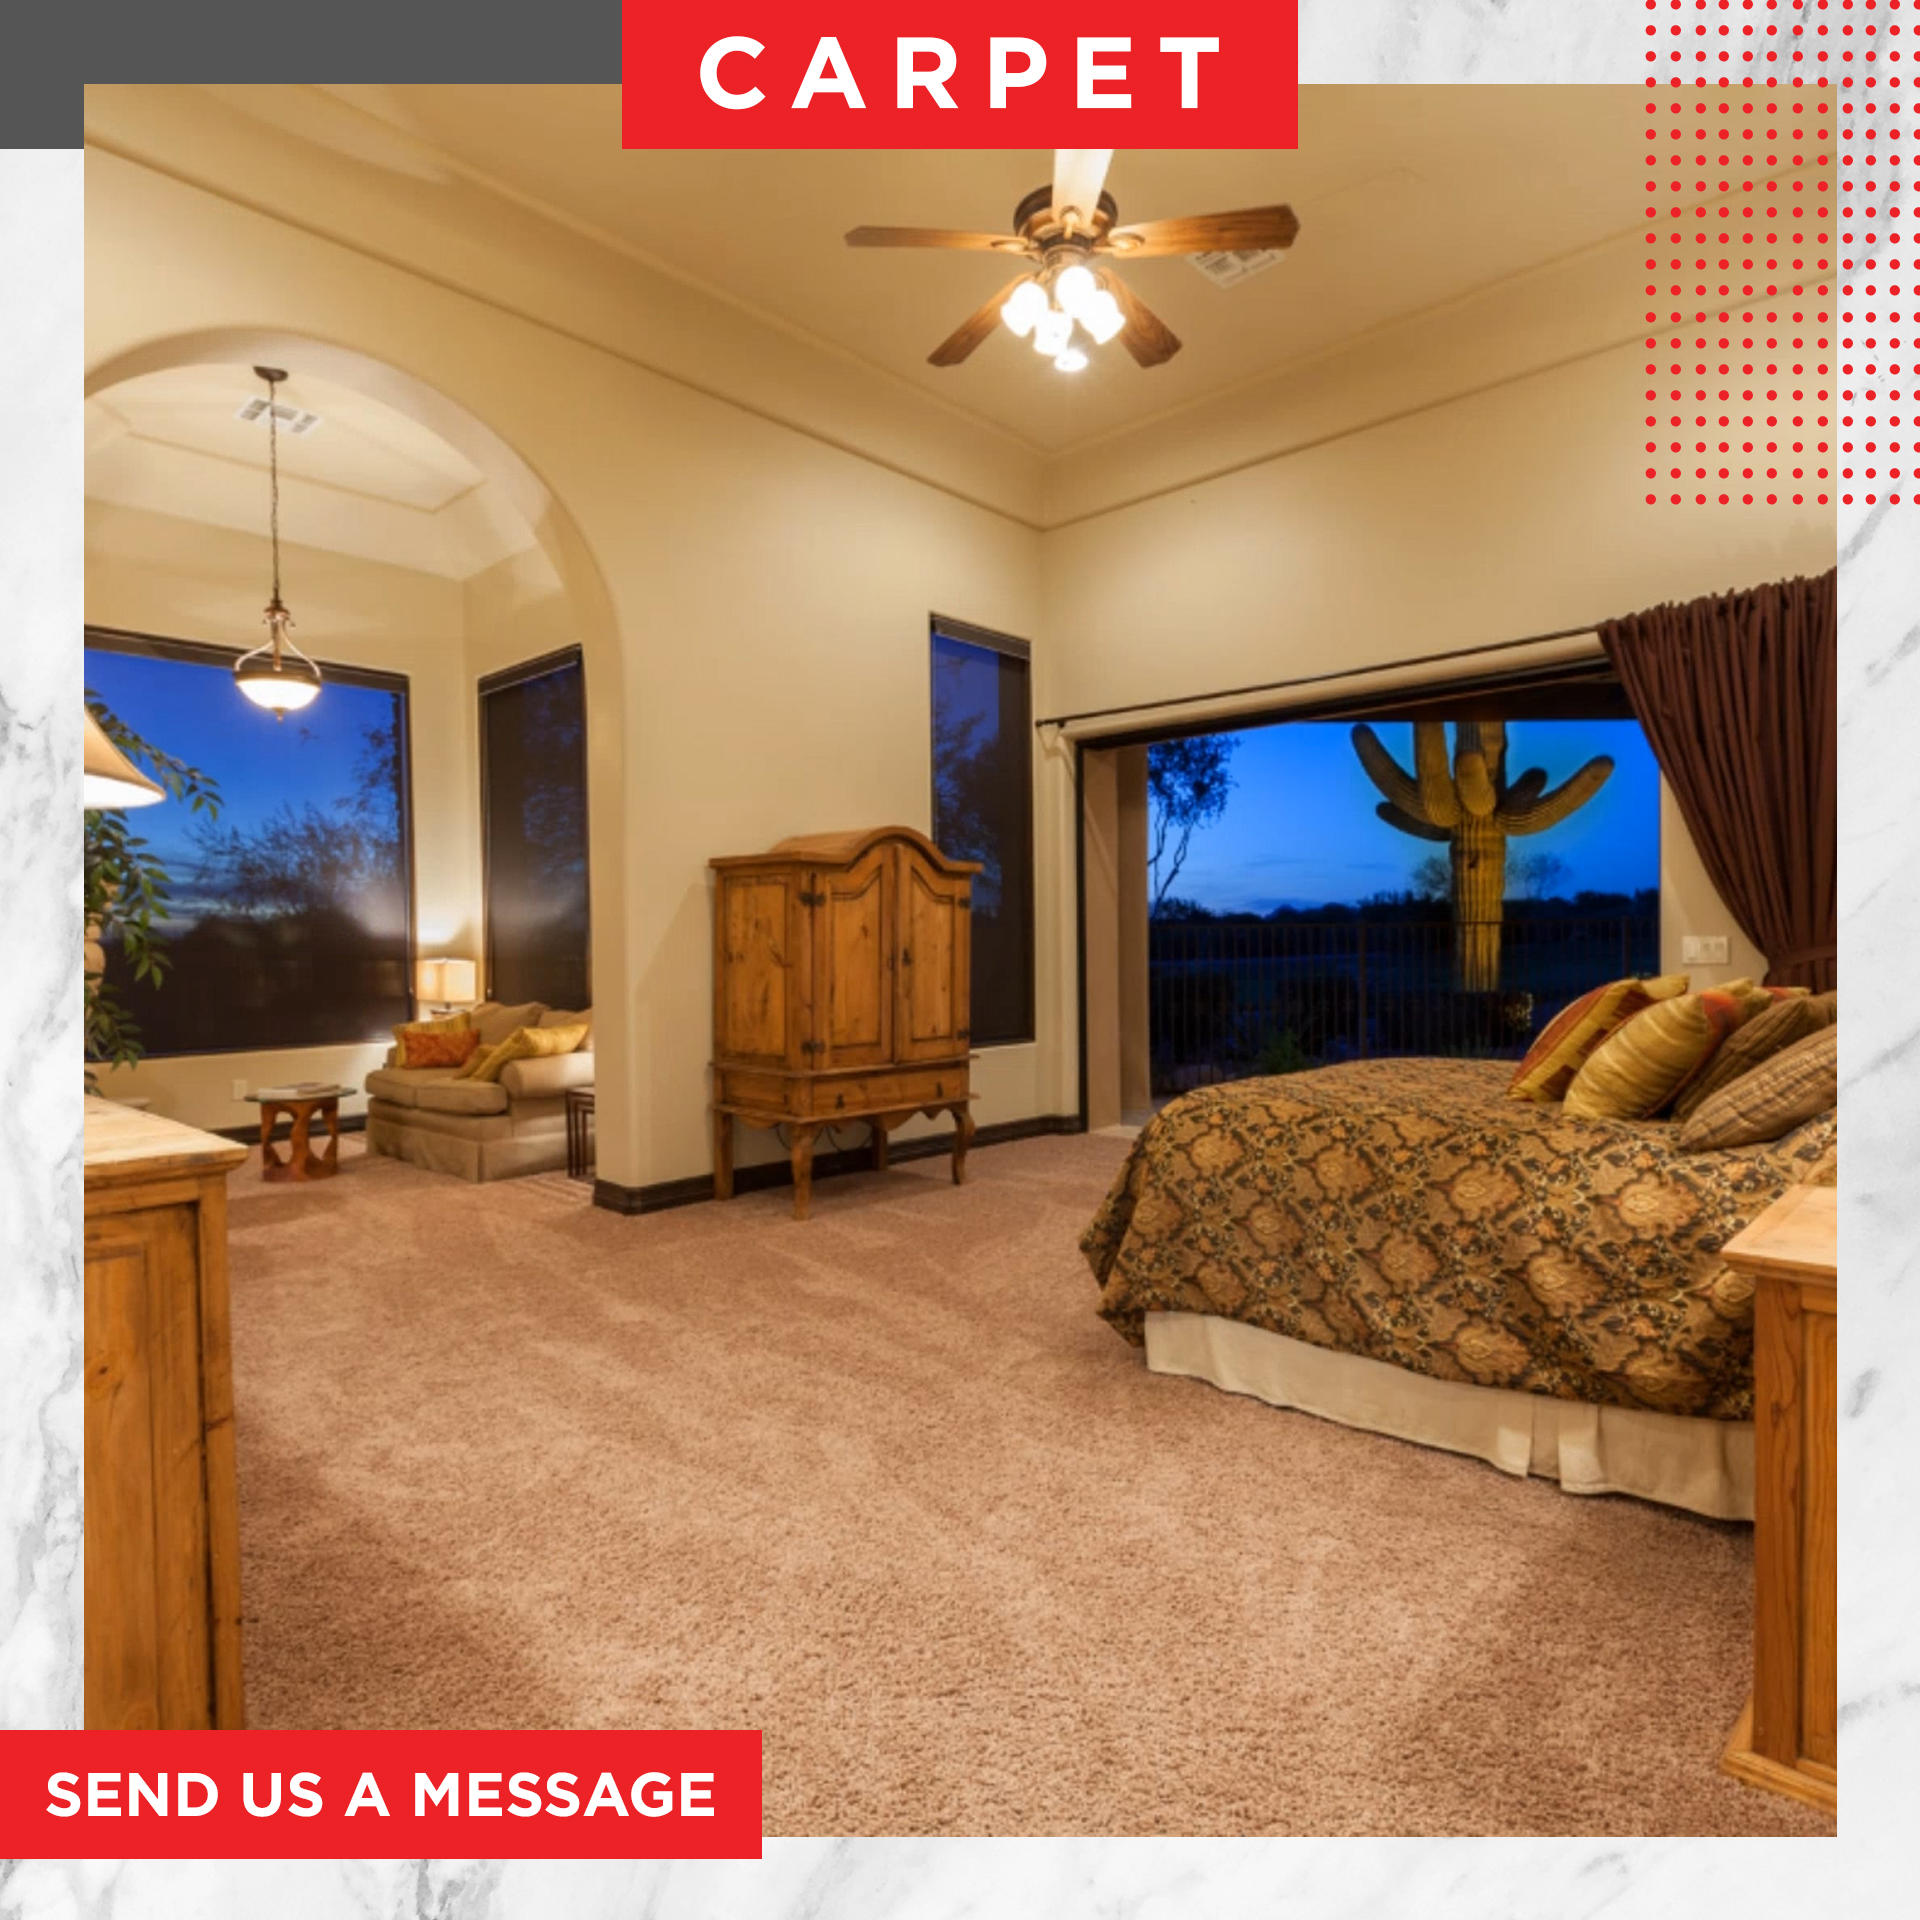 We can't get over with this install!  We tore out the old flooring and replaced it with this carpet product. It looks flawless in this bedroom! Call Home Solutionz Today For Your Flooring Project <(623) 289-3880>. Home Solutionz - Tempe is Licensed, Bonded, and Insured. Home Solutionz offers 12 - 24 Months 0% Financing Through Wells Fargo. Home Solutionz Tempe - 3125 S 52nd St, Suite 107 Tempe, AZ 85282 United States  Carpet  FloorInstallation  Flooring (Disclaimer: flooring on photos aren't actual products of Home Solutionz but these are what we can offer)